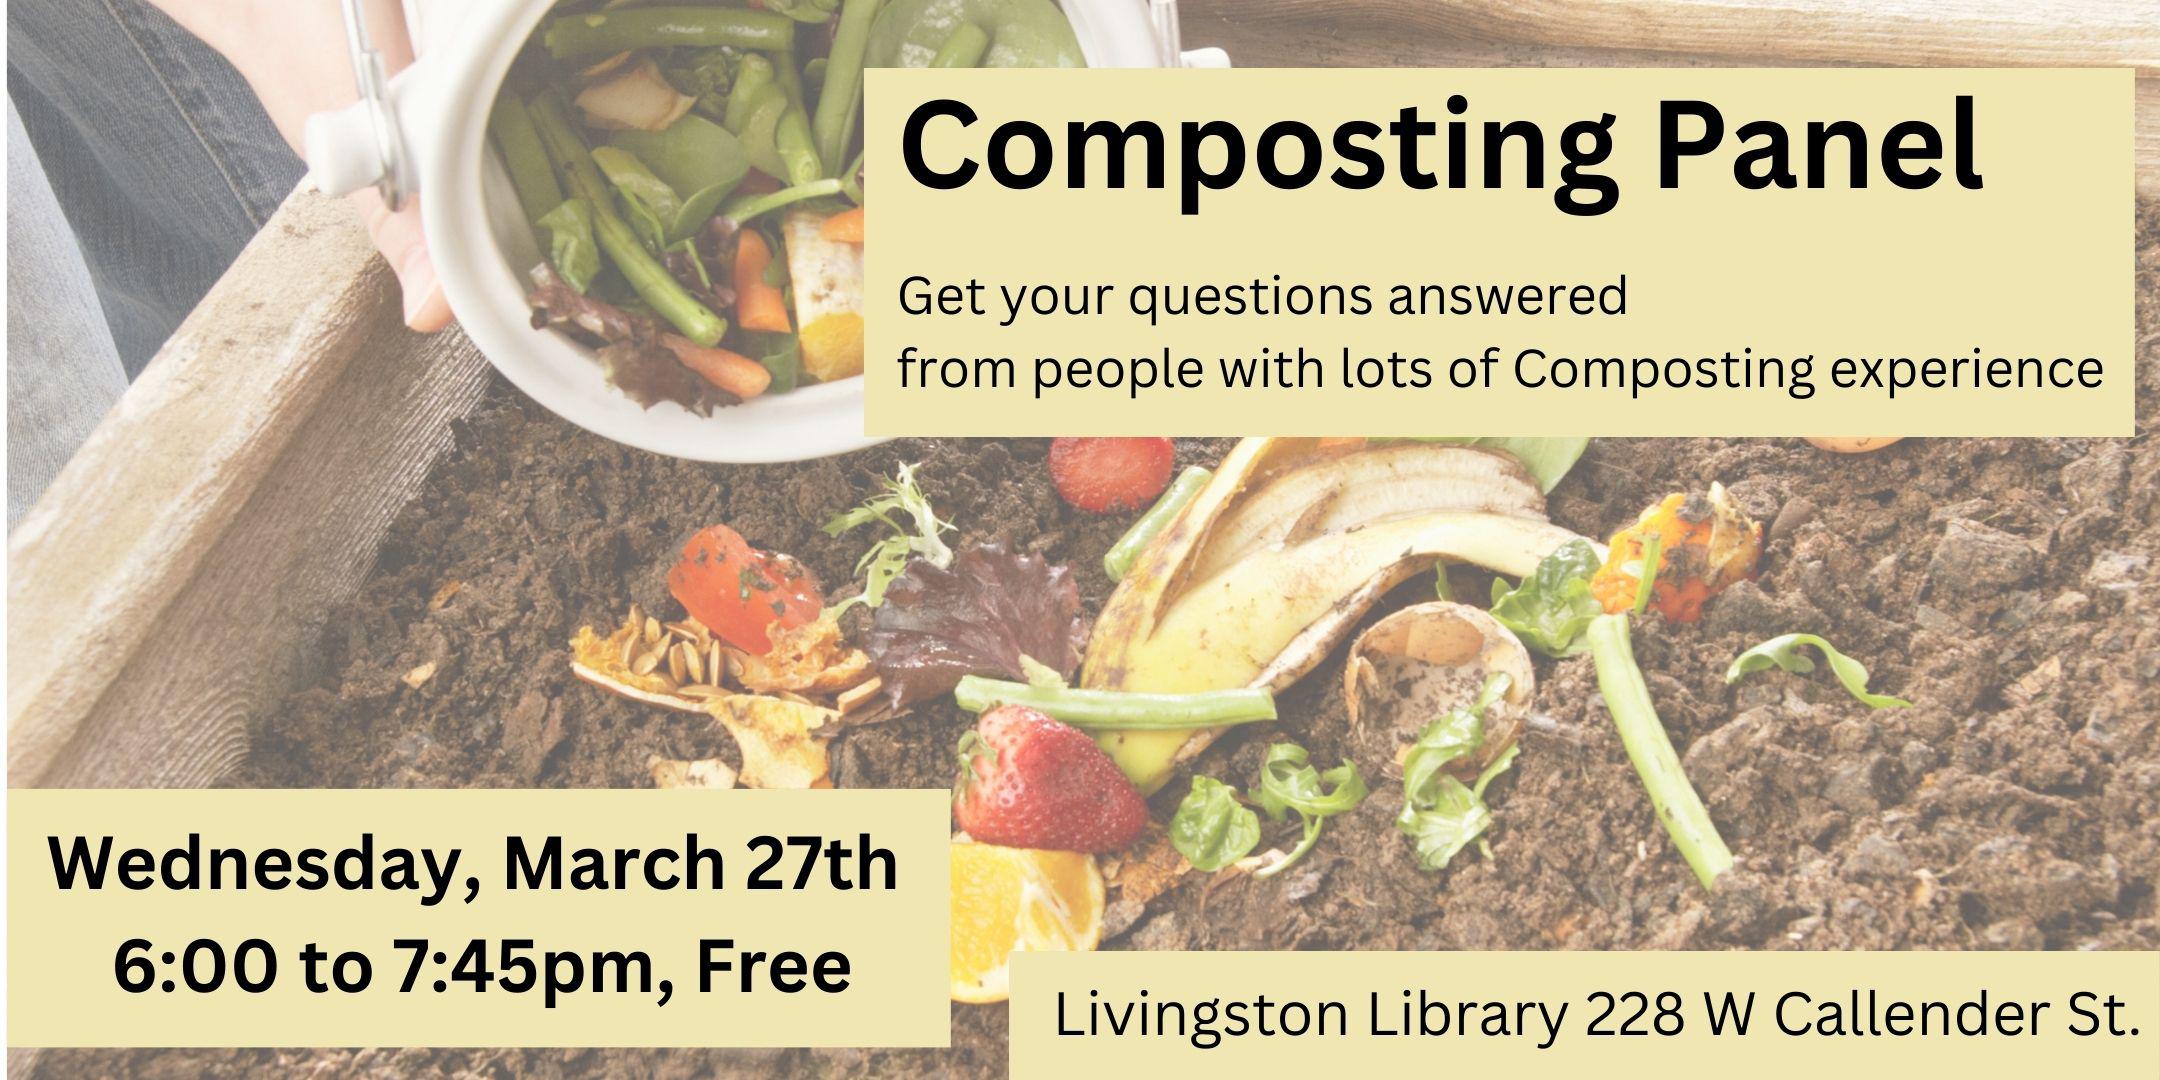 Composting Panel -Get Your Composting Questions Answered